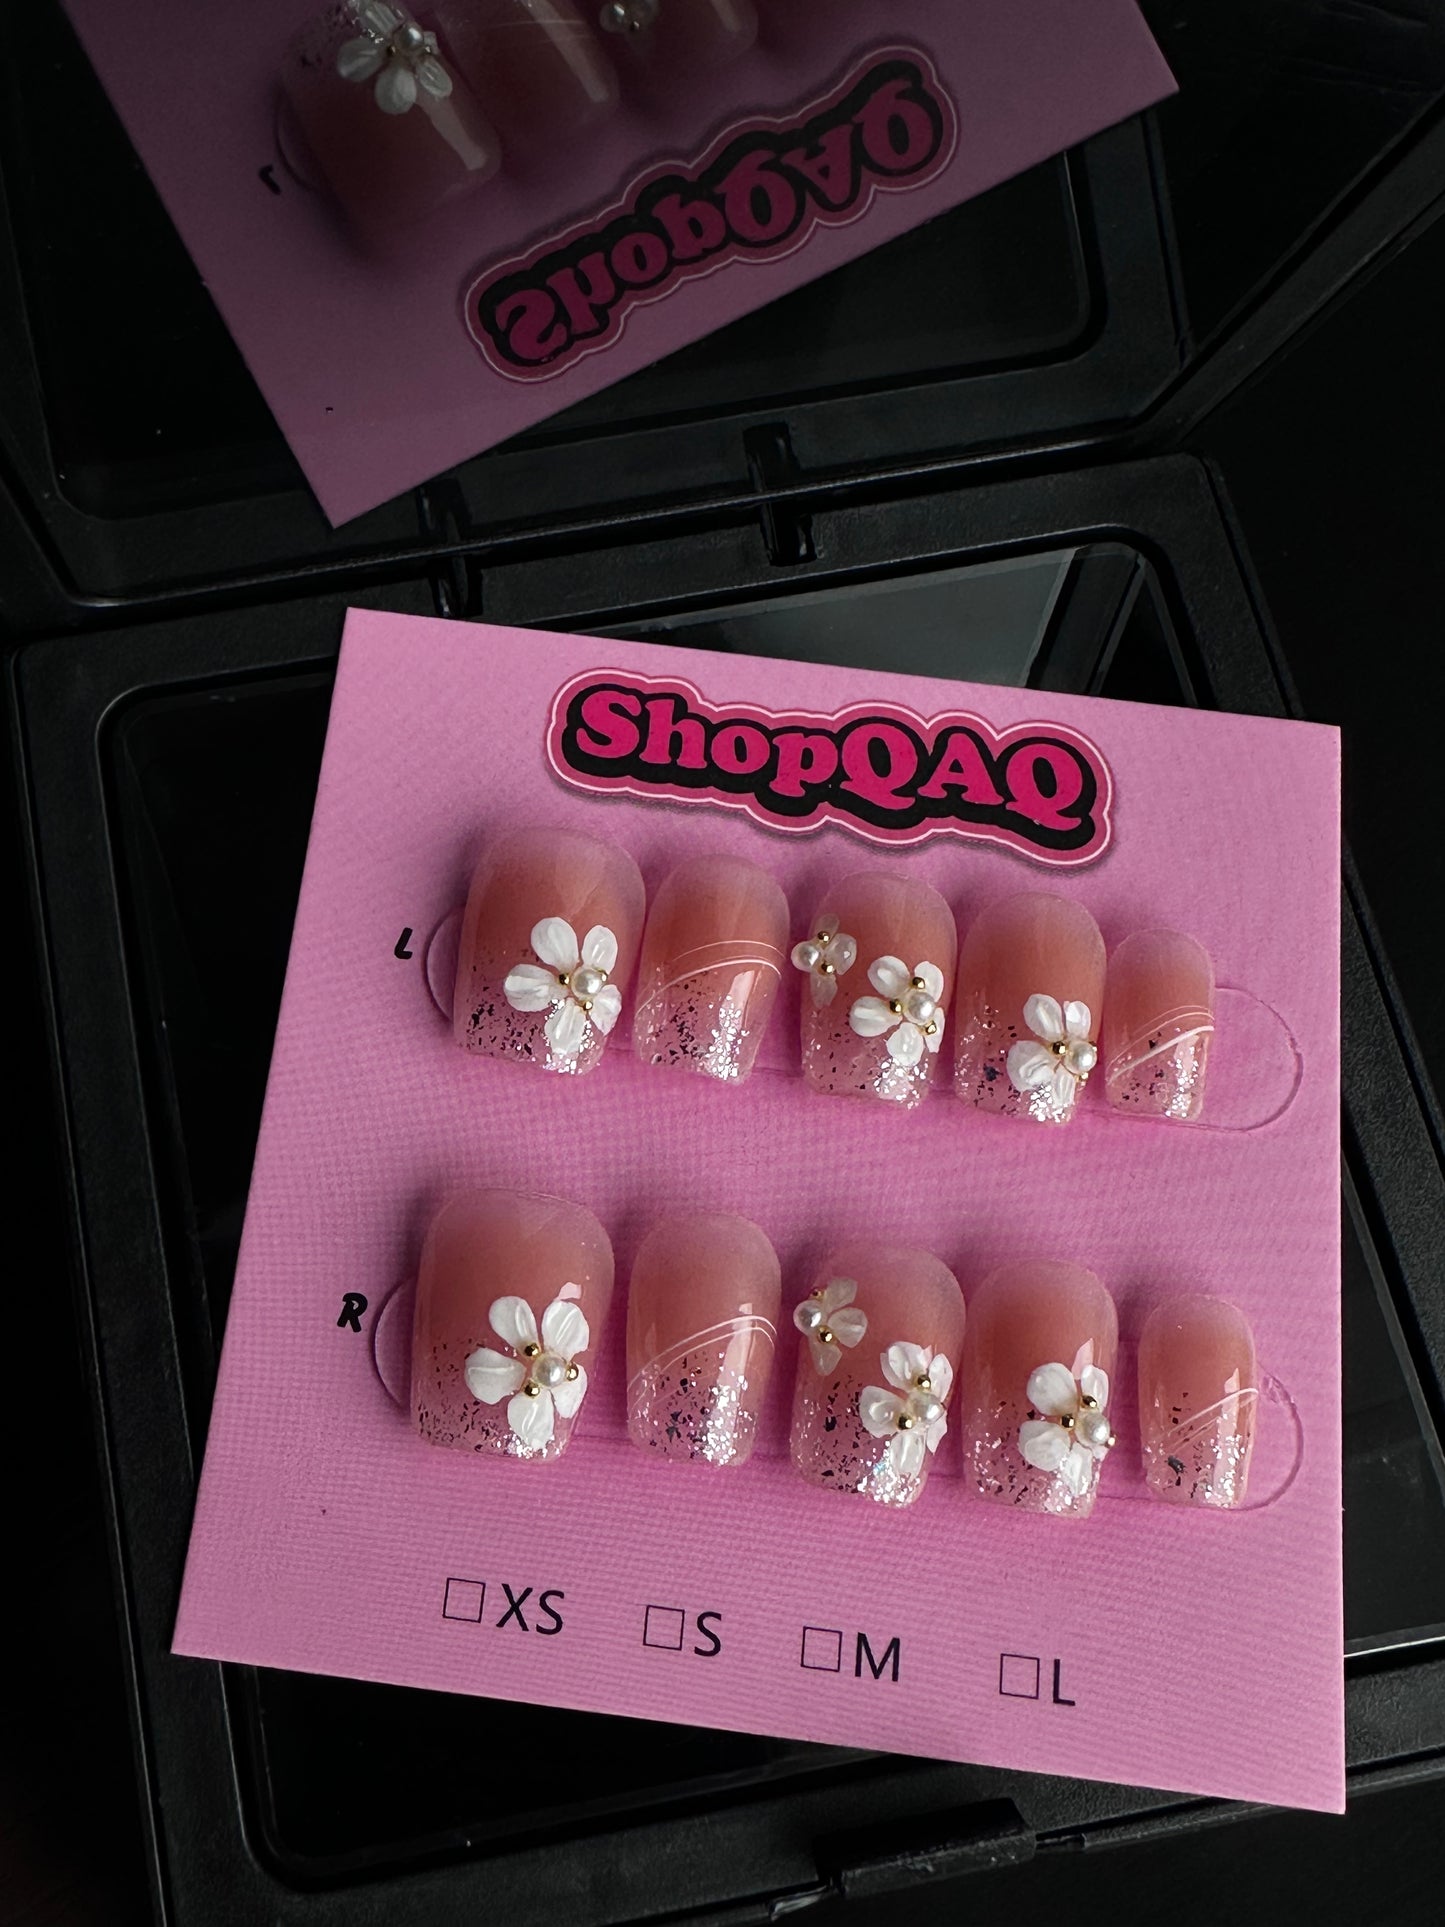 Gentle Pink Sakura Blossom Handcrafted French High-End Commuter False Nails from SHOPQAQ